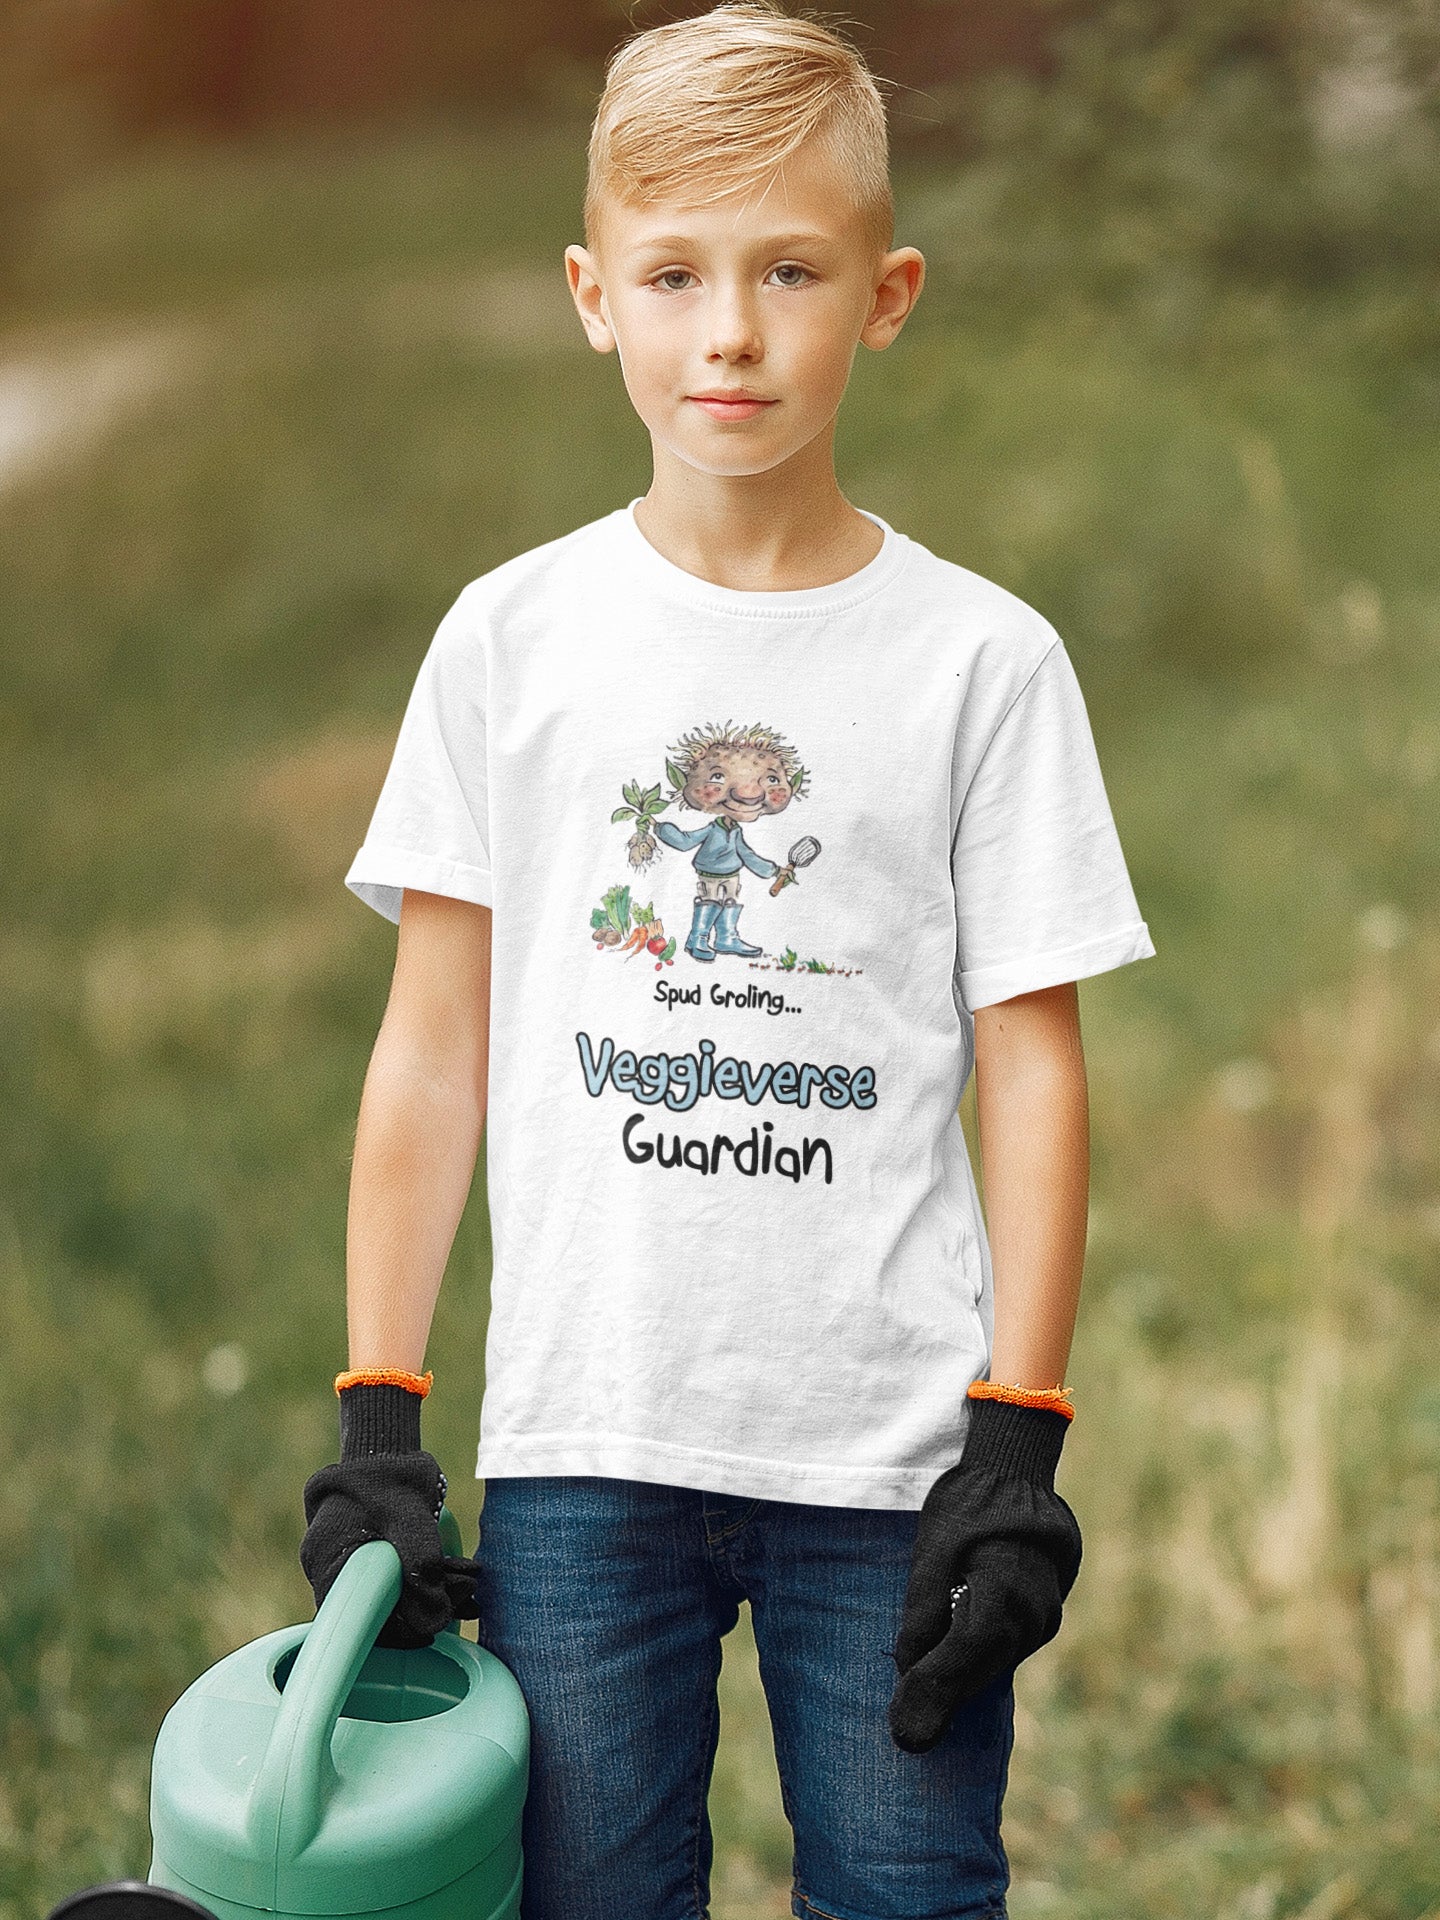 A white official USA Grolings kids t-shirt featuring the phrase 'Spud Groling... Veggieverse Guardian. The t-shirt showcases Spud Groling, standing with a freshly harvested potato plant in his hand, surrounded by a variety of fresh vegetables. Spud Groling's message encourages the wearer to embrace a role as a protector and caretaker of the vegetable world. Worn by a young boy holding a watering can.